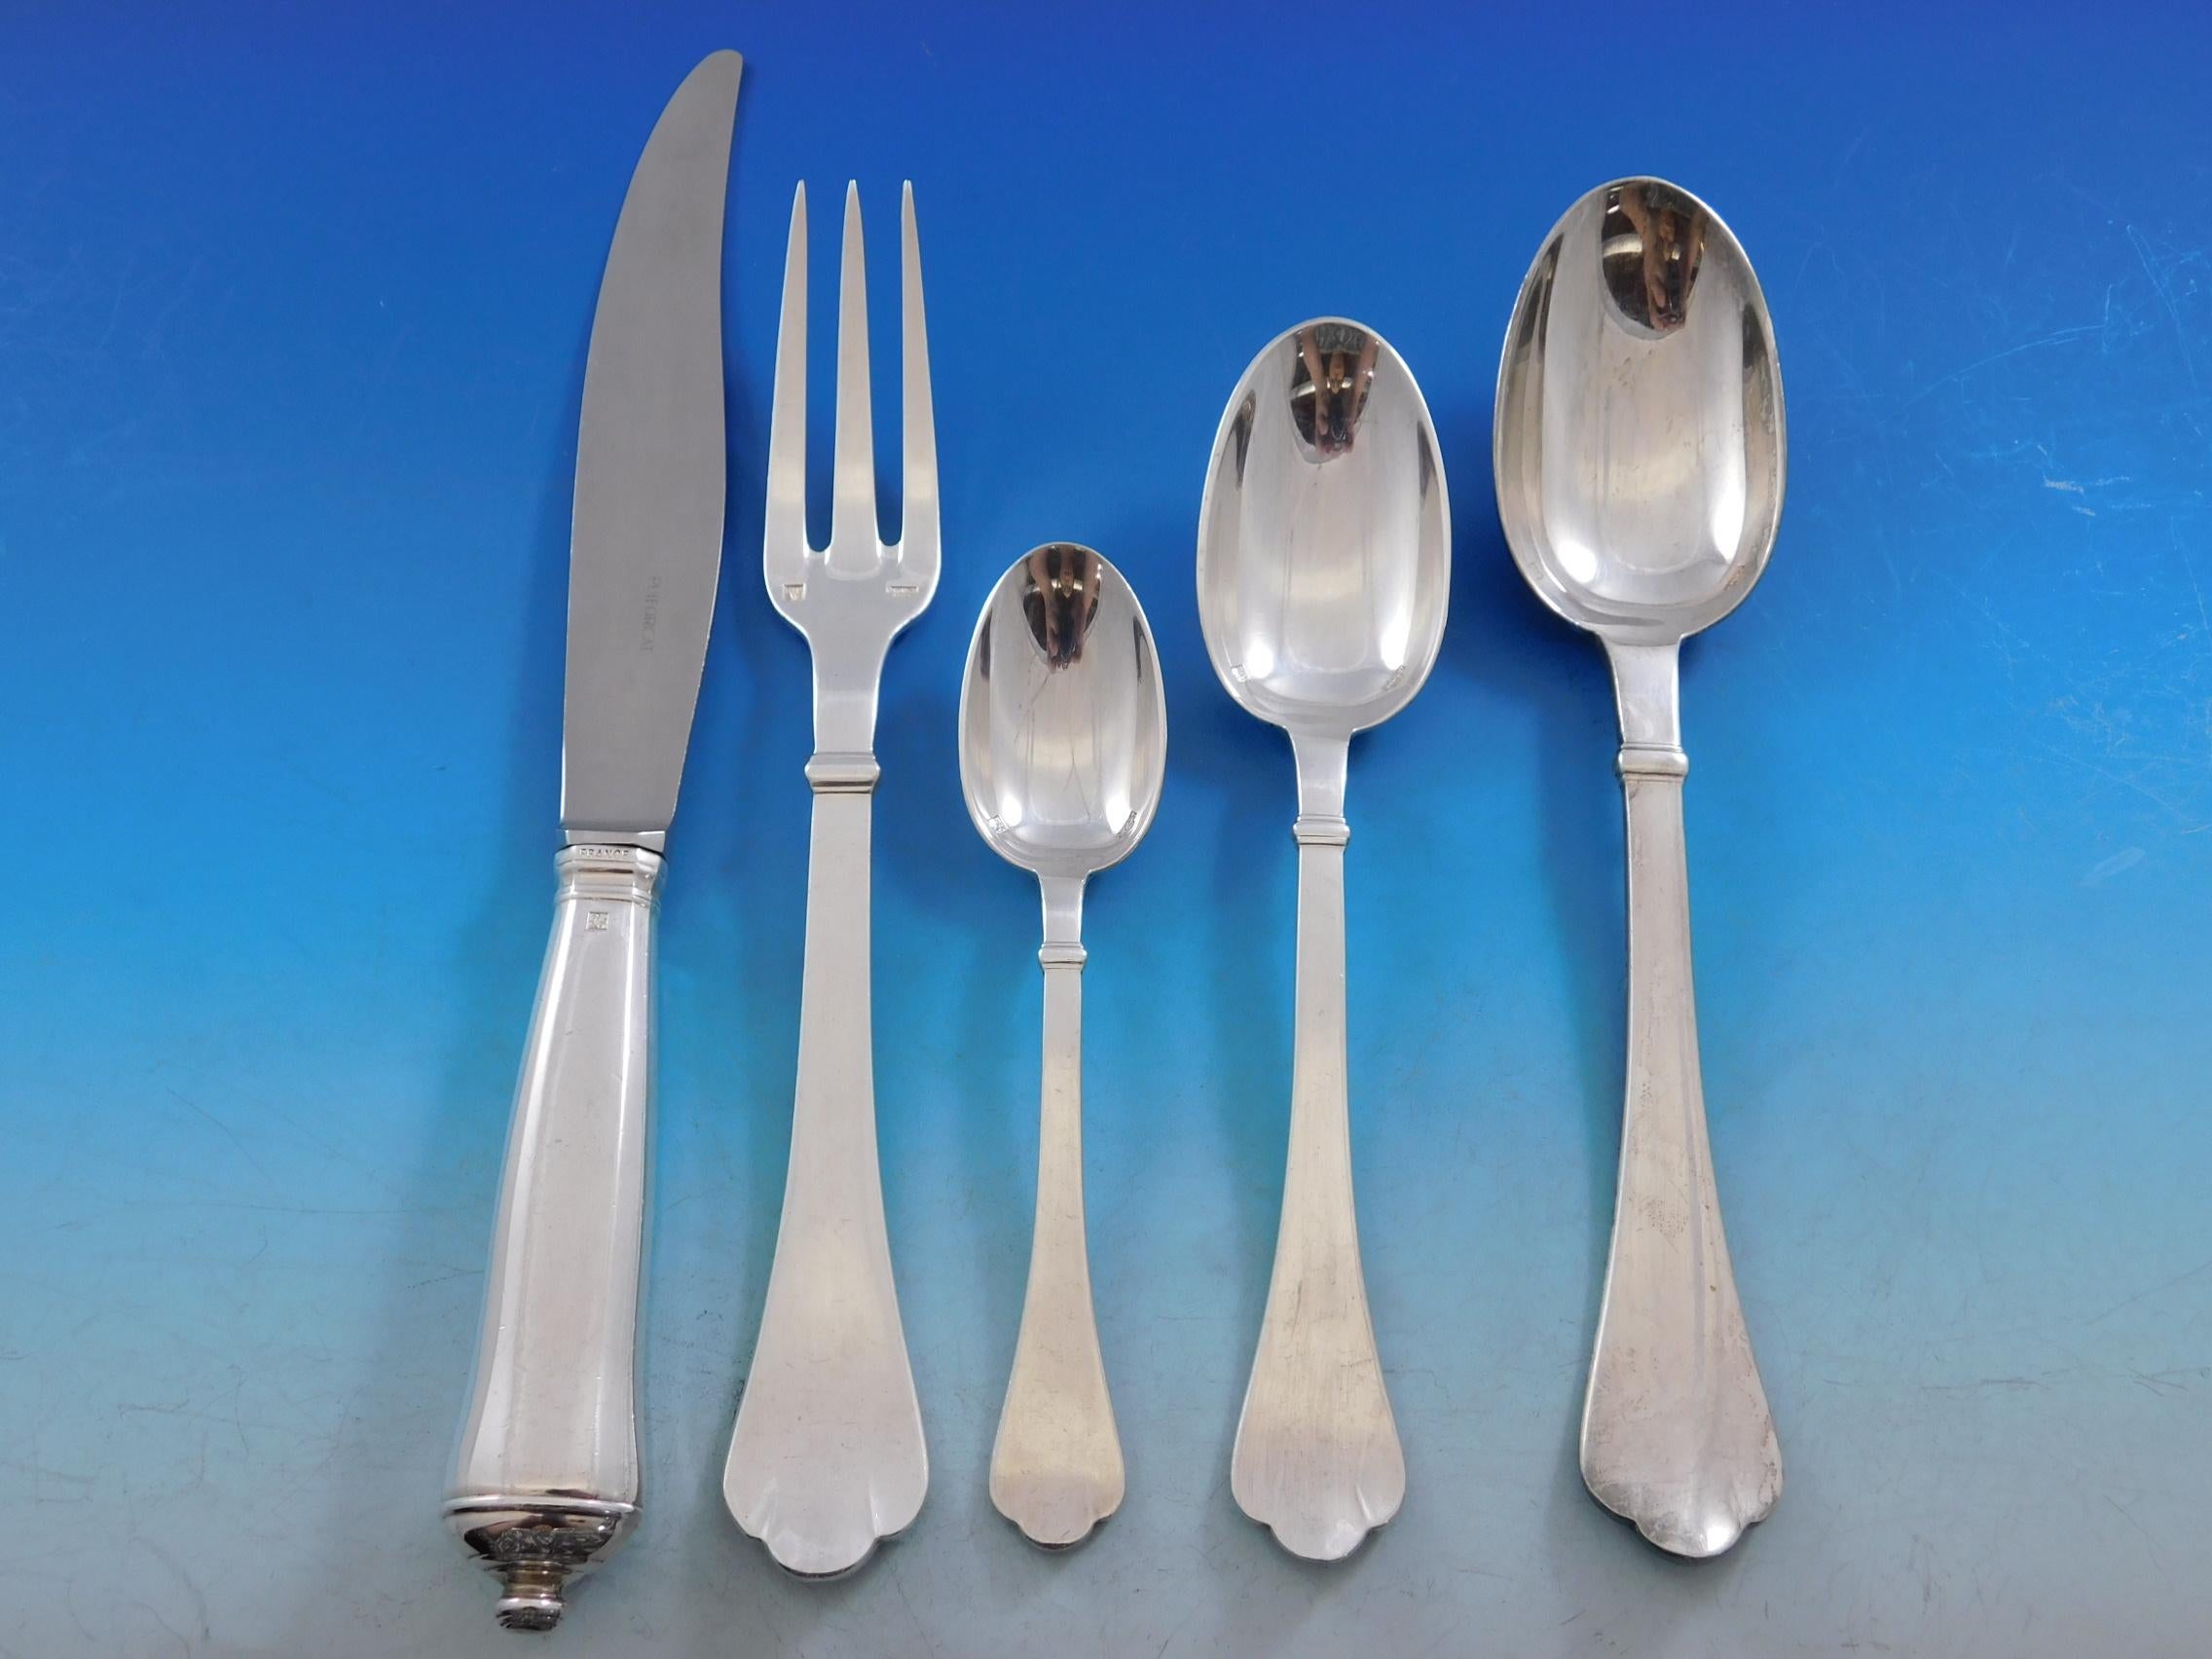 The Parisian silversmith Puiforcat is regarded as one of the legendary names in European silver craftsmanship. 

Cardinal by Puiforcat silverplated flatware set, 51 pieces. This set includes:

10 dinner size knives, 9 7/8